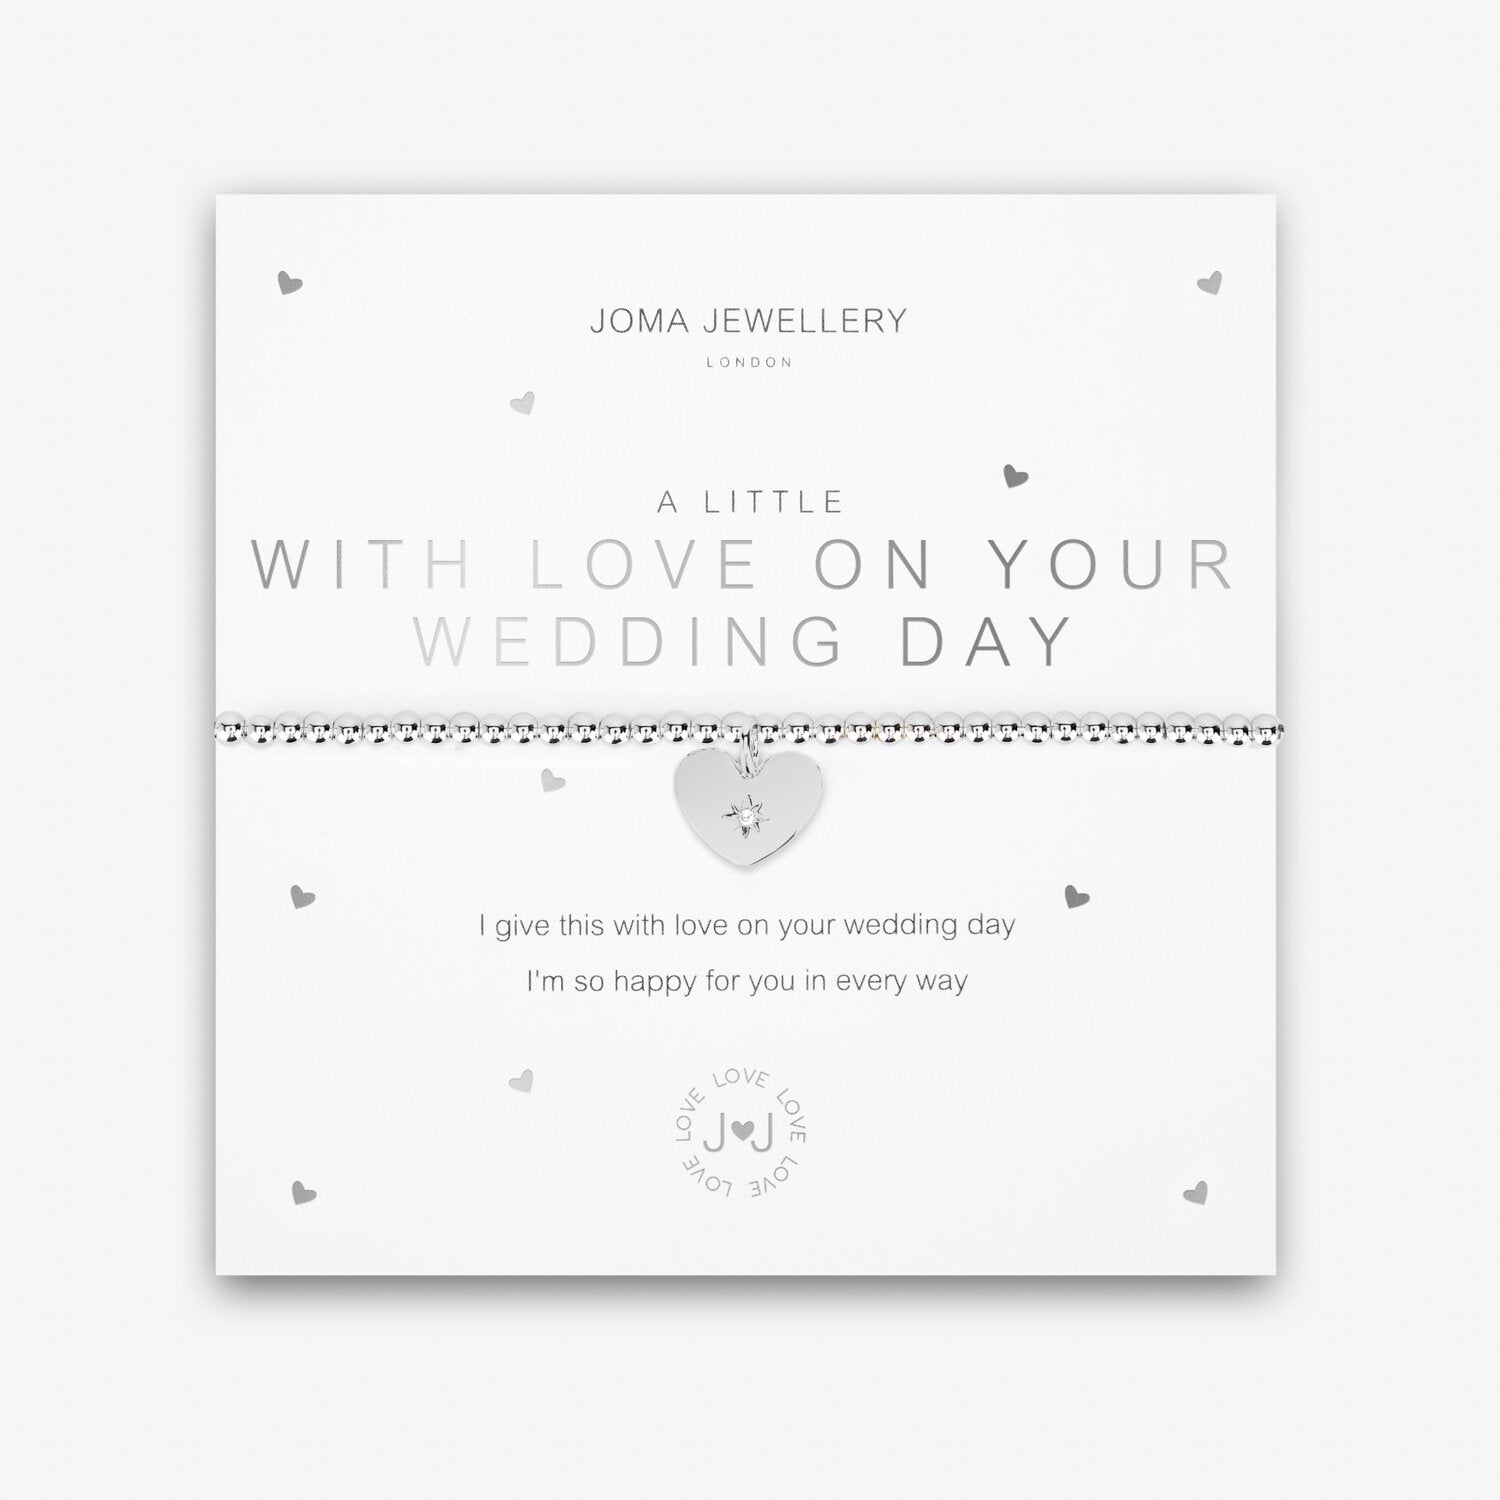 A Little - With Love On Your Wedding Day Bracelet - Joma Jewellery